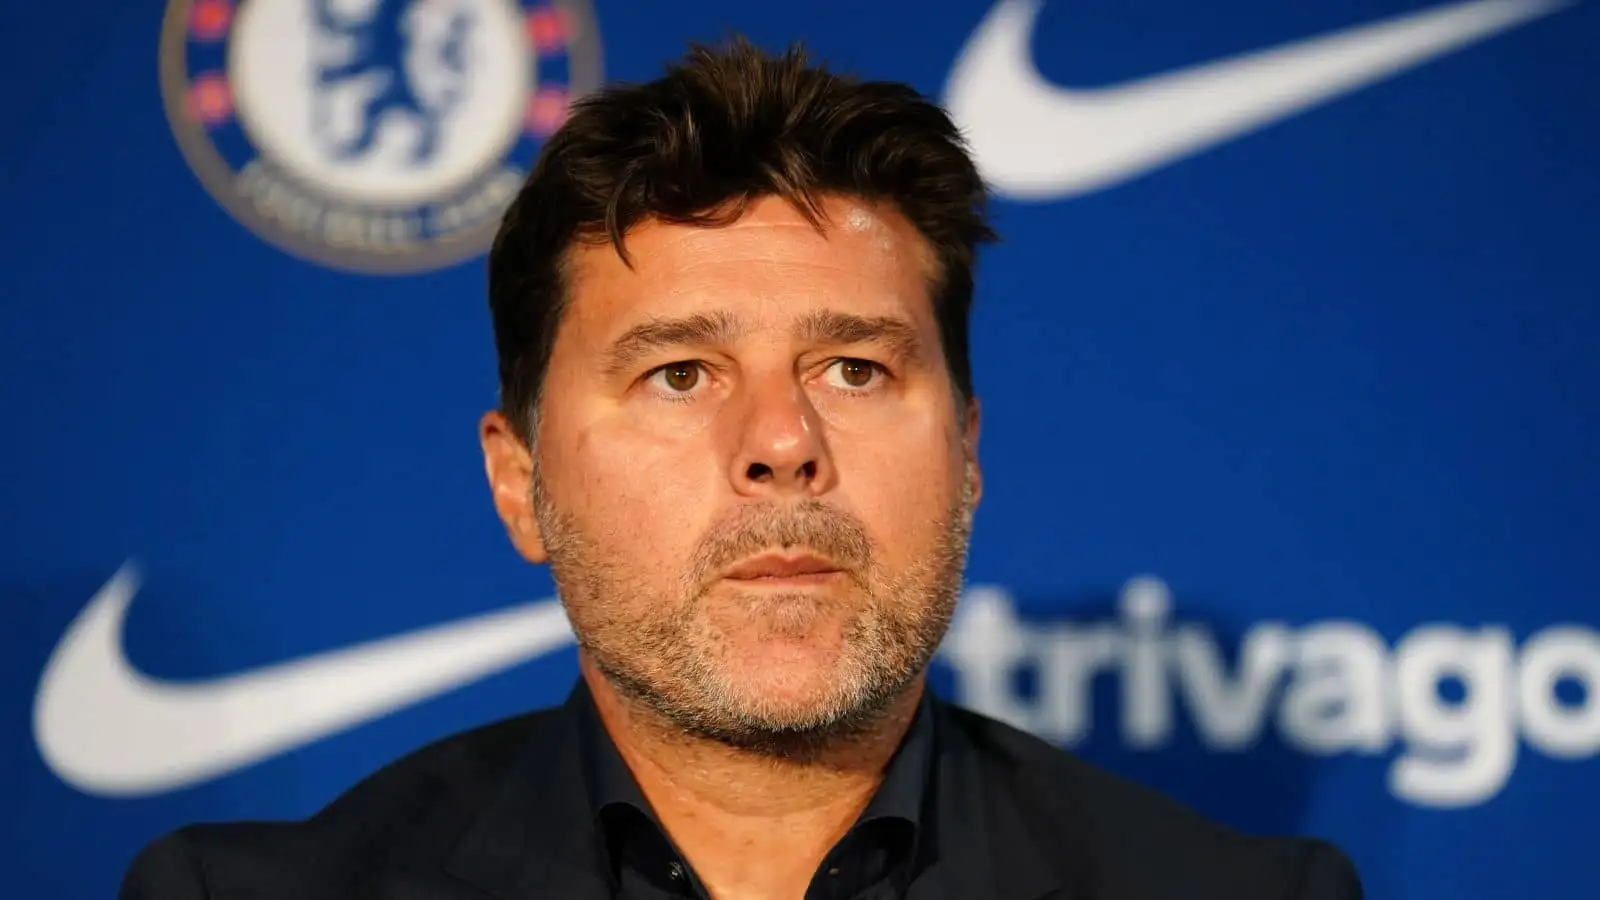 Mauricio Pochettino during his Chelsea unveiling press conference